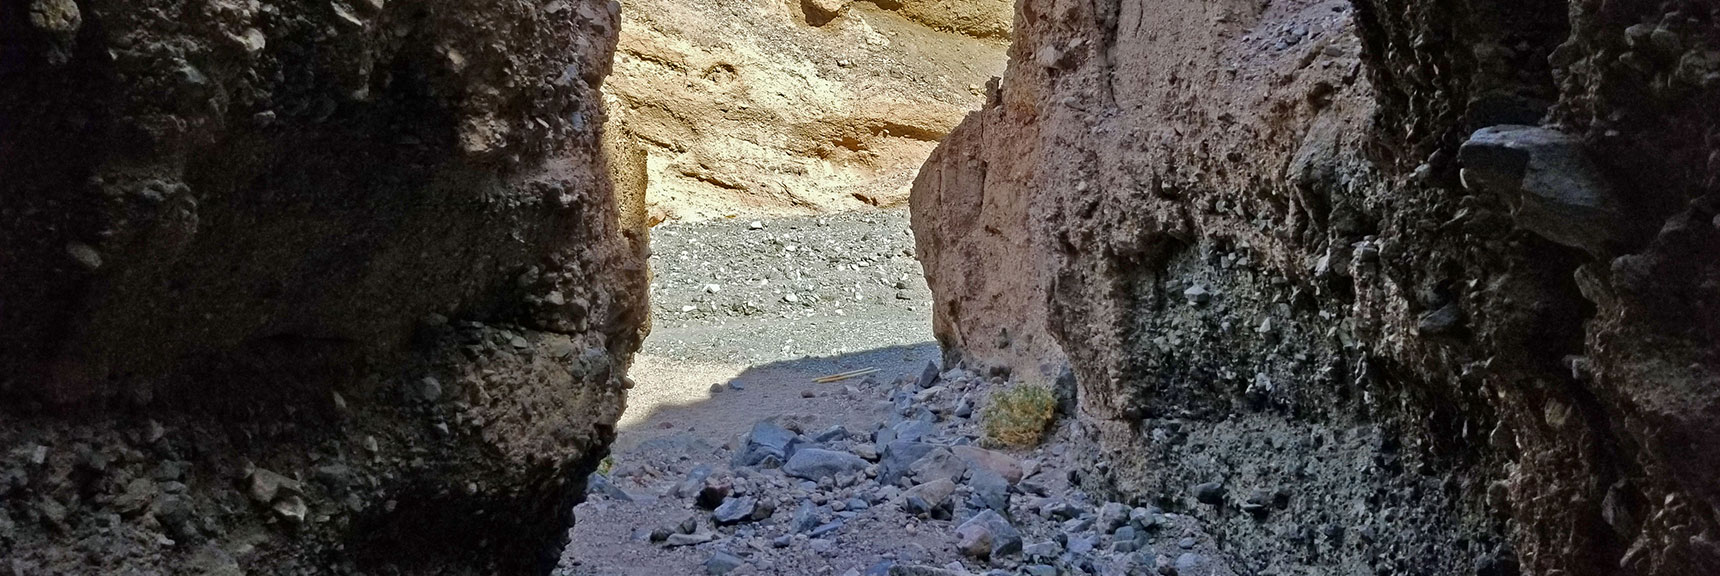 View Out Slot Canyon Entrance | Willow Canyon | Death Valley National Park, California